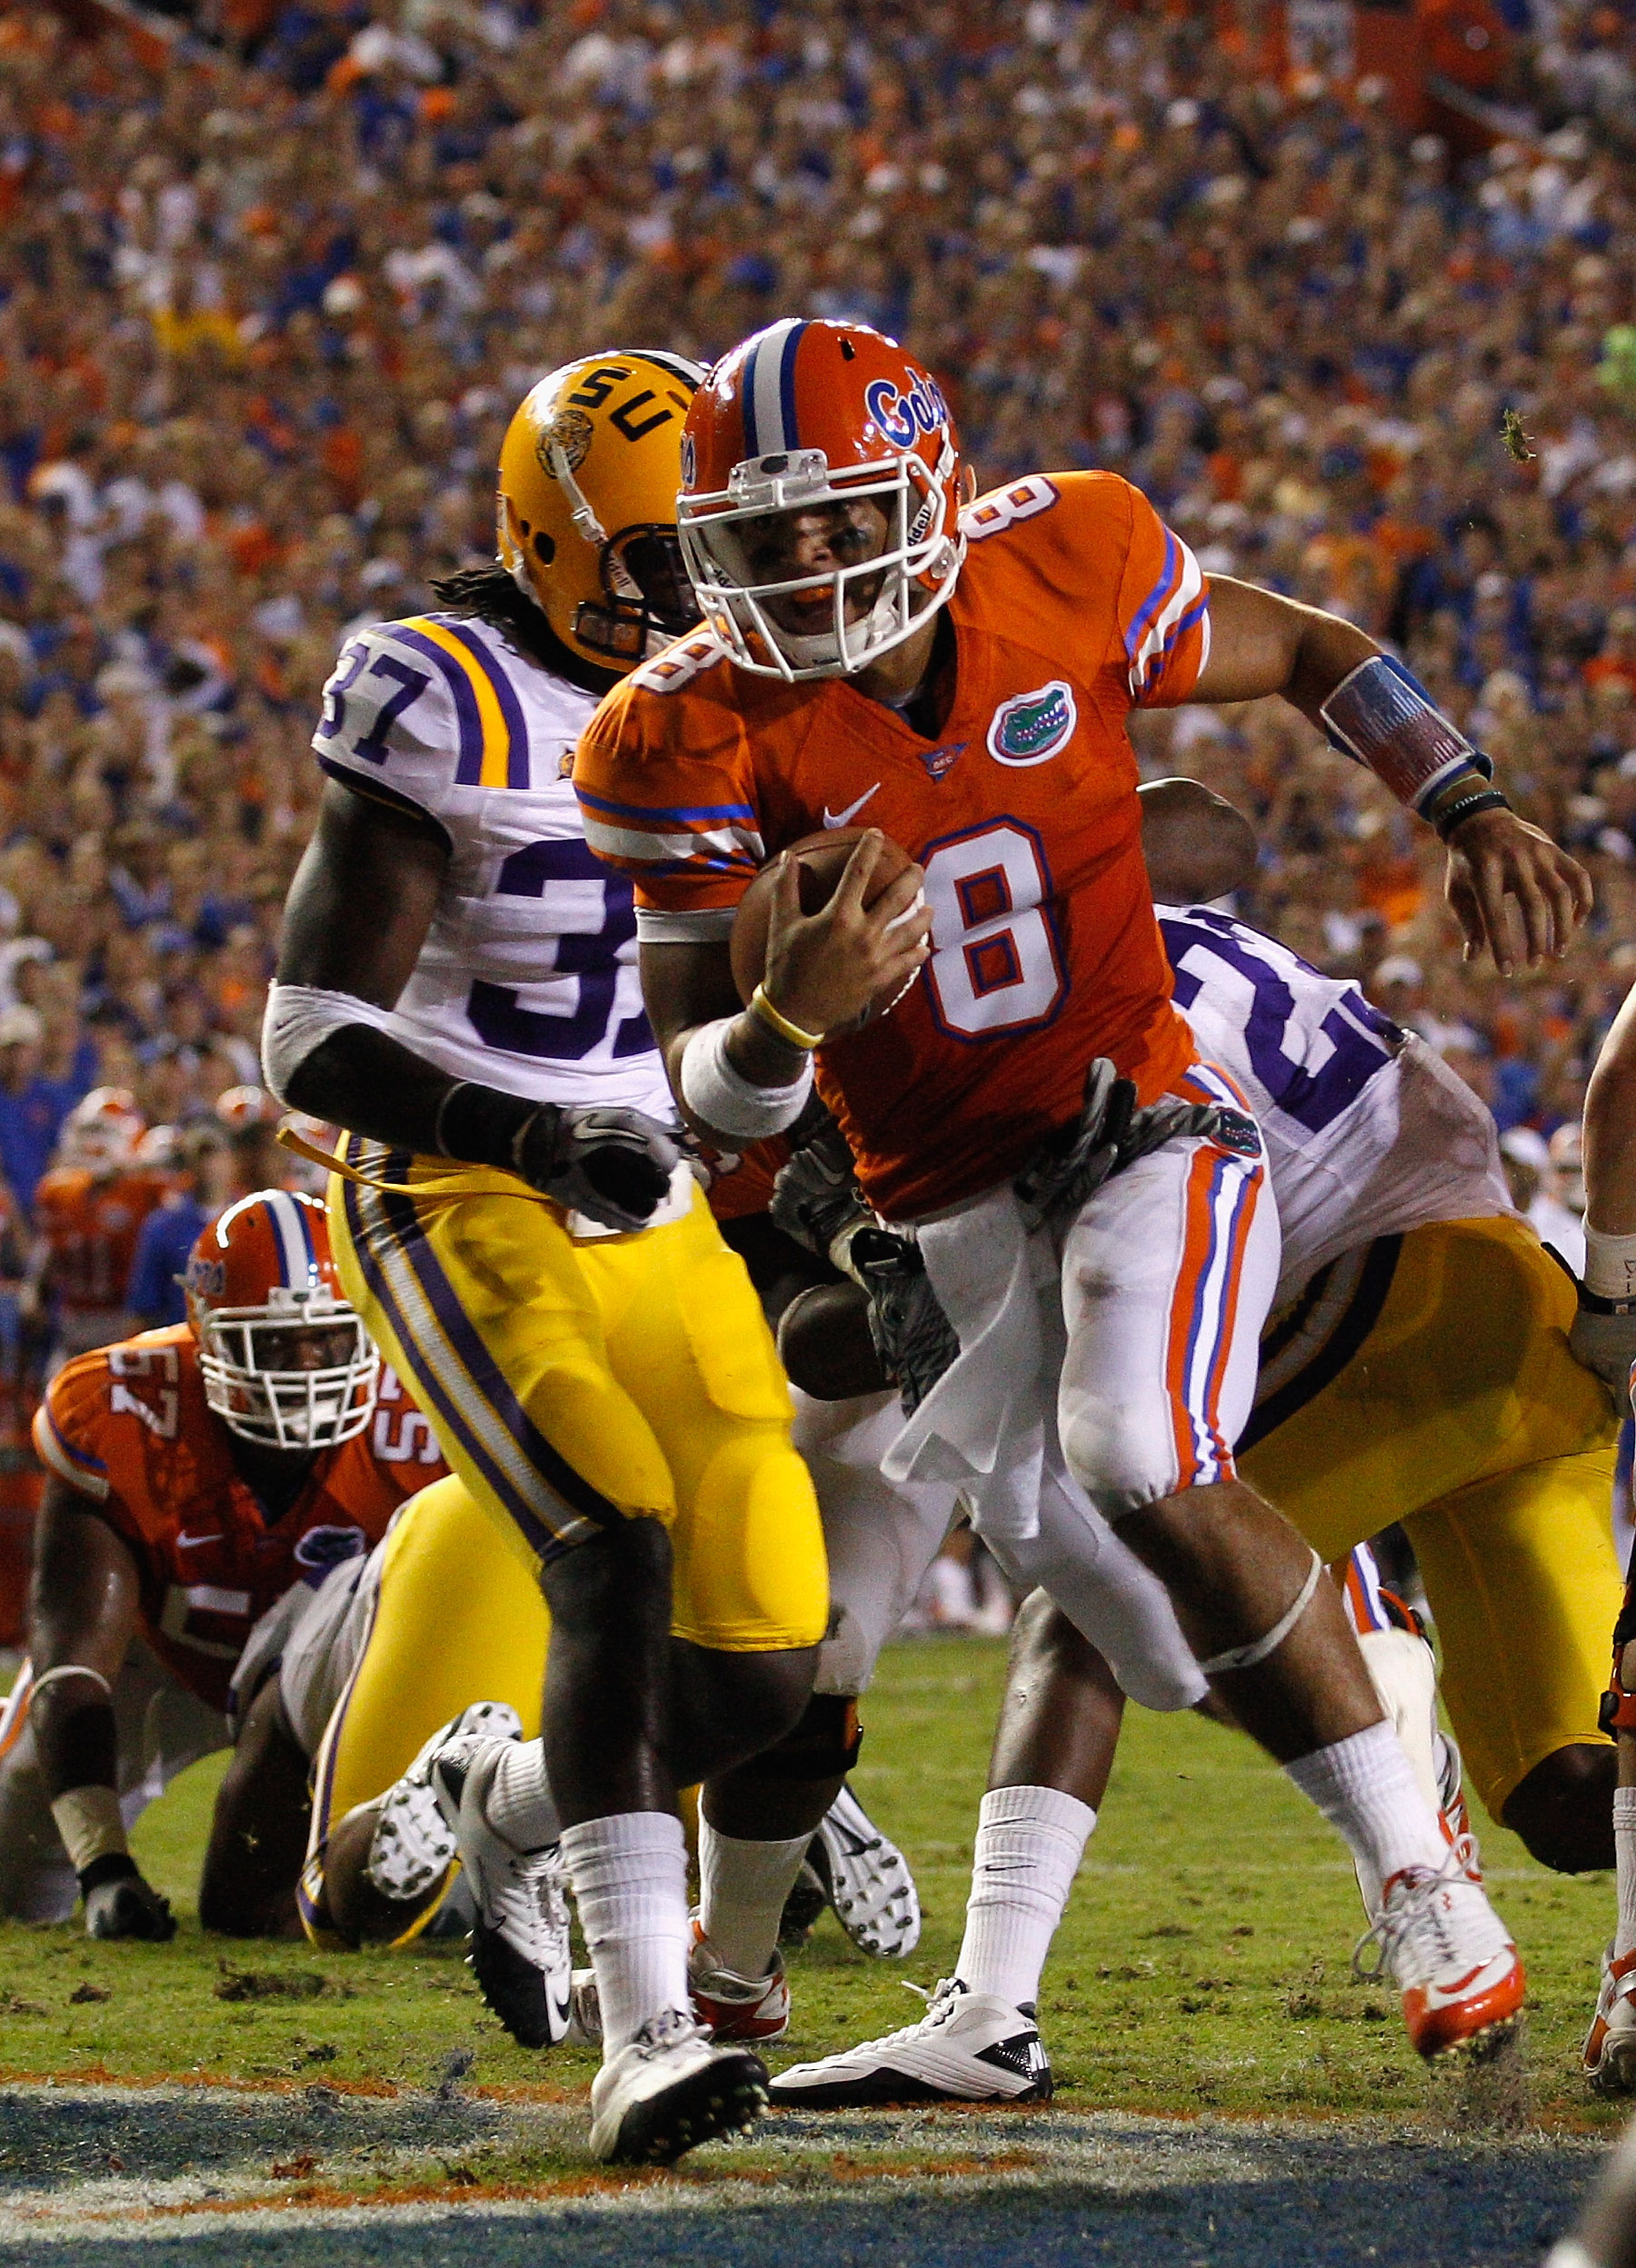 GAINESVILLE, FL - OCTOBER 09:  Quarterback Trey Burton #8 of the Florida Gators scores a touchdown during the game against the Louisiana State University Tigers at Ben Hill Griffin Stadium on October 9, 2010 in Gainesville, Florida.  (Photo by Sam Greenwo